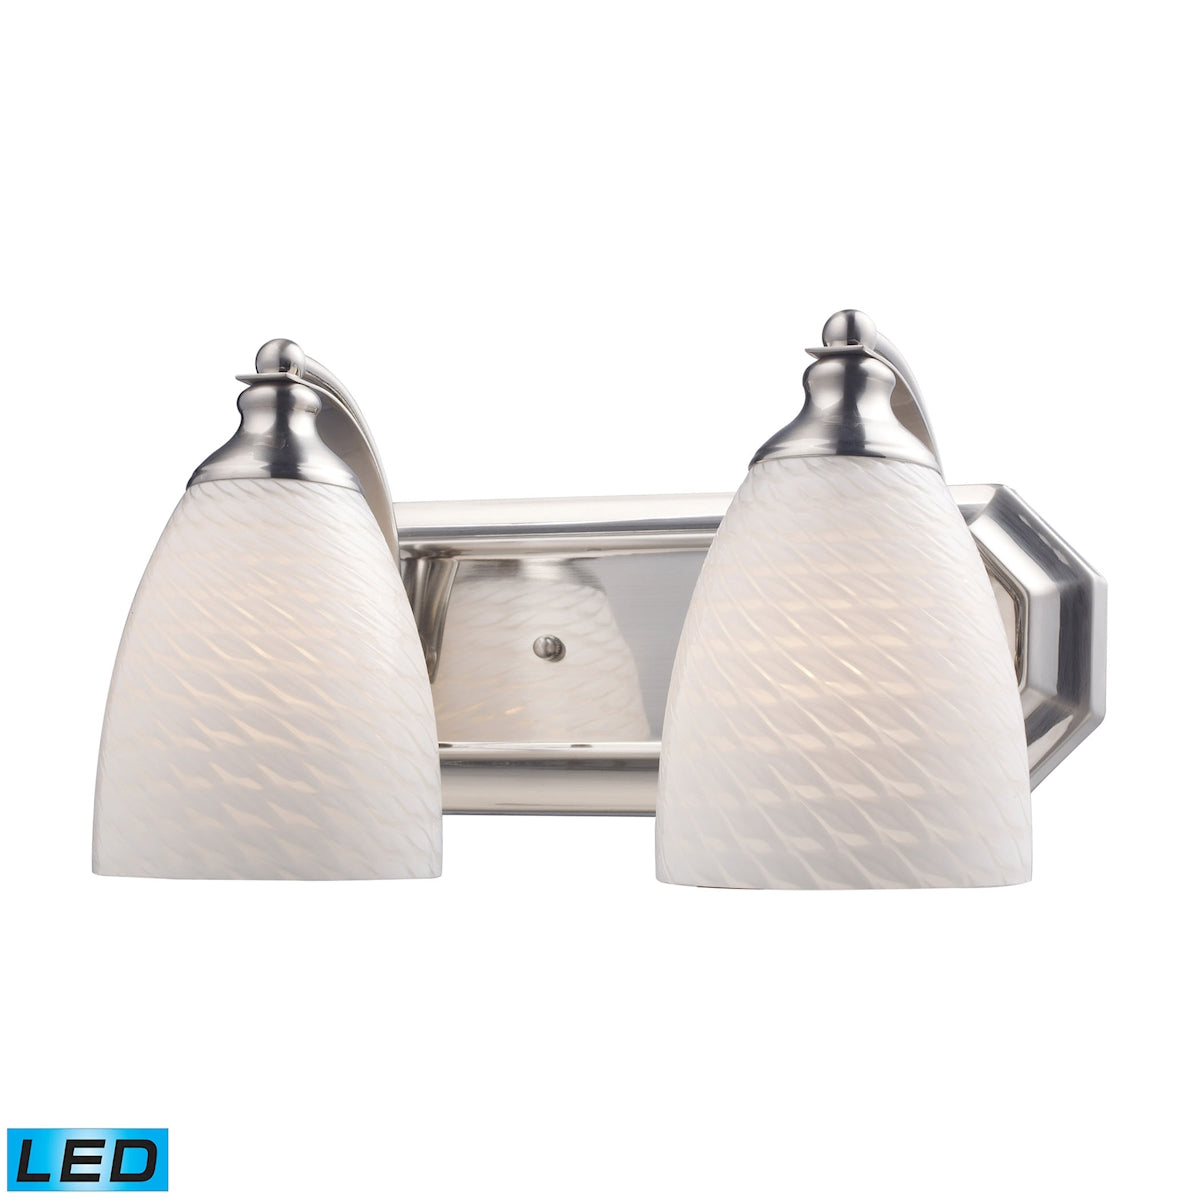 ELK Lighting 570-2N-WS-LED Mix-N-Match Vanity 2-Light Wall Lamp in Satin Nickel with White Swirl Glass - Includes LED Bulbs